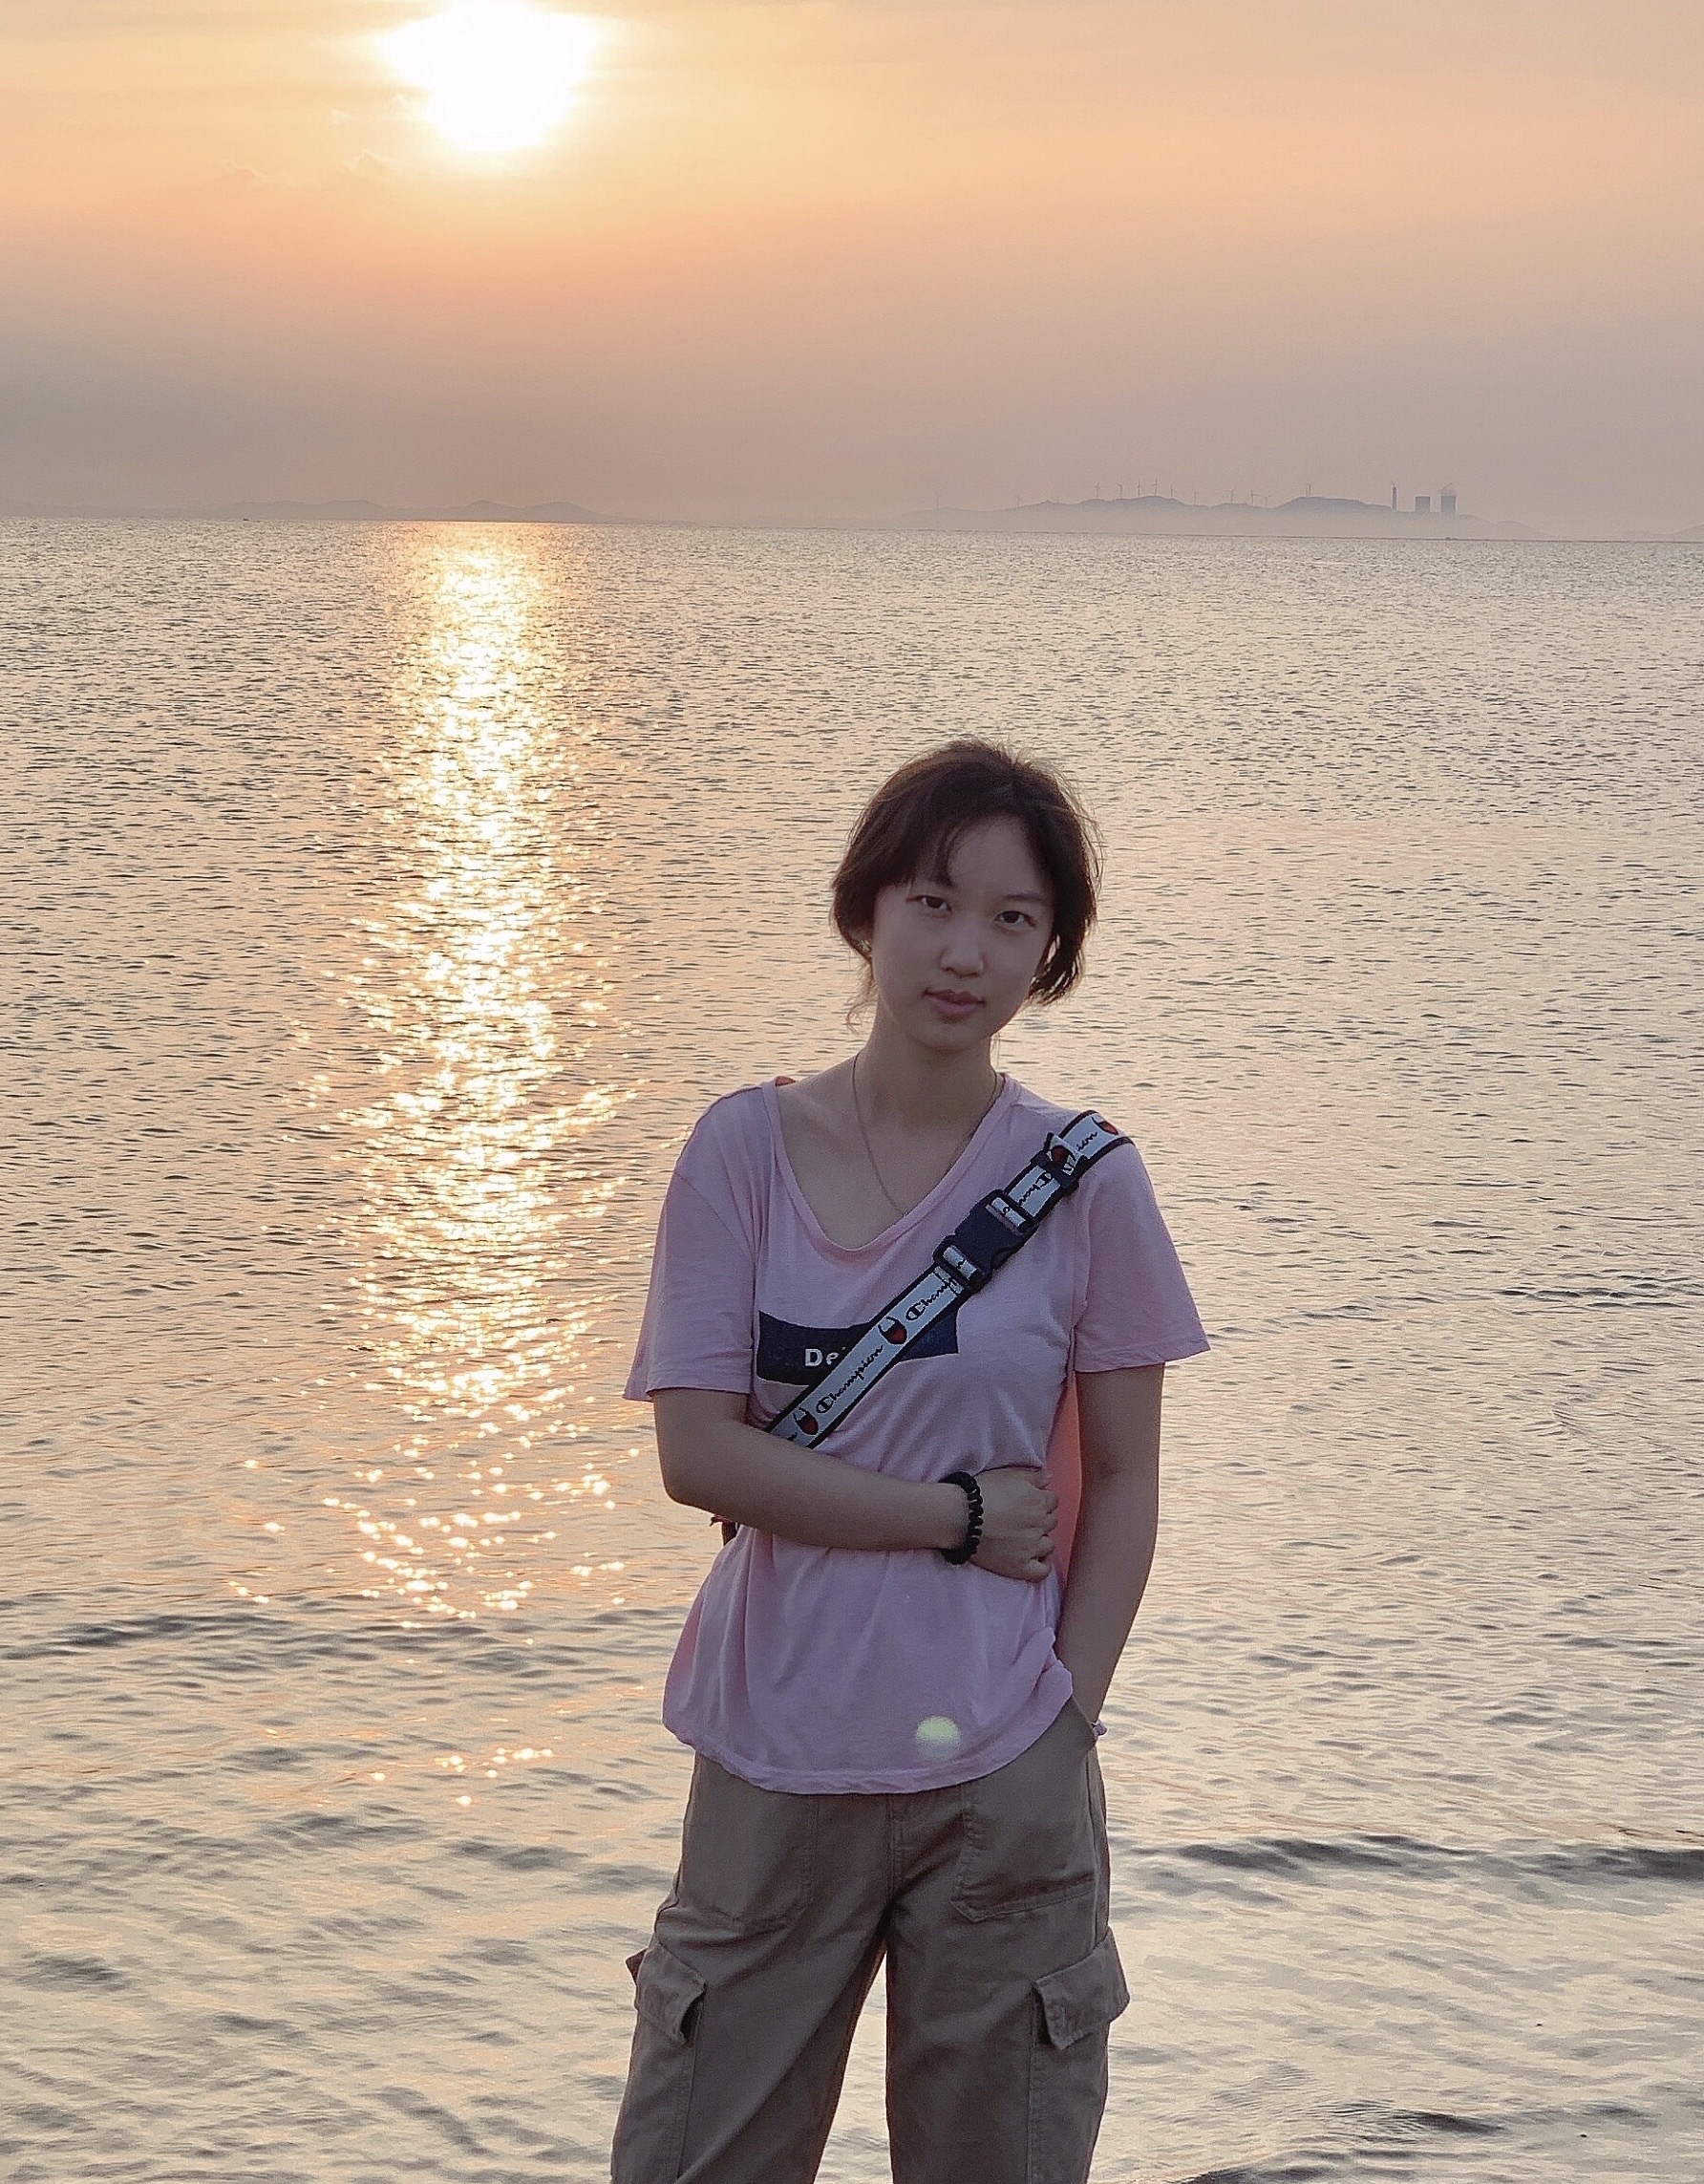 Sherry Gao in front of a sunset